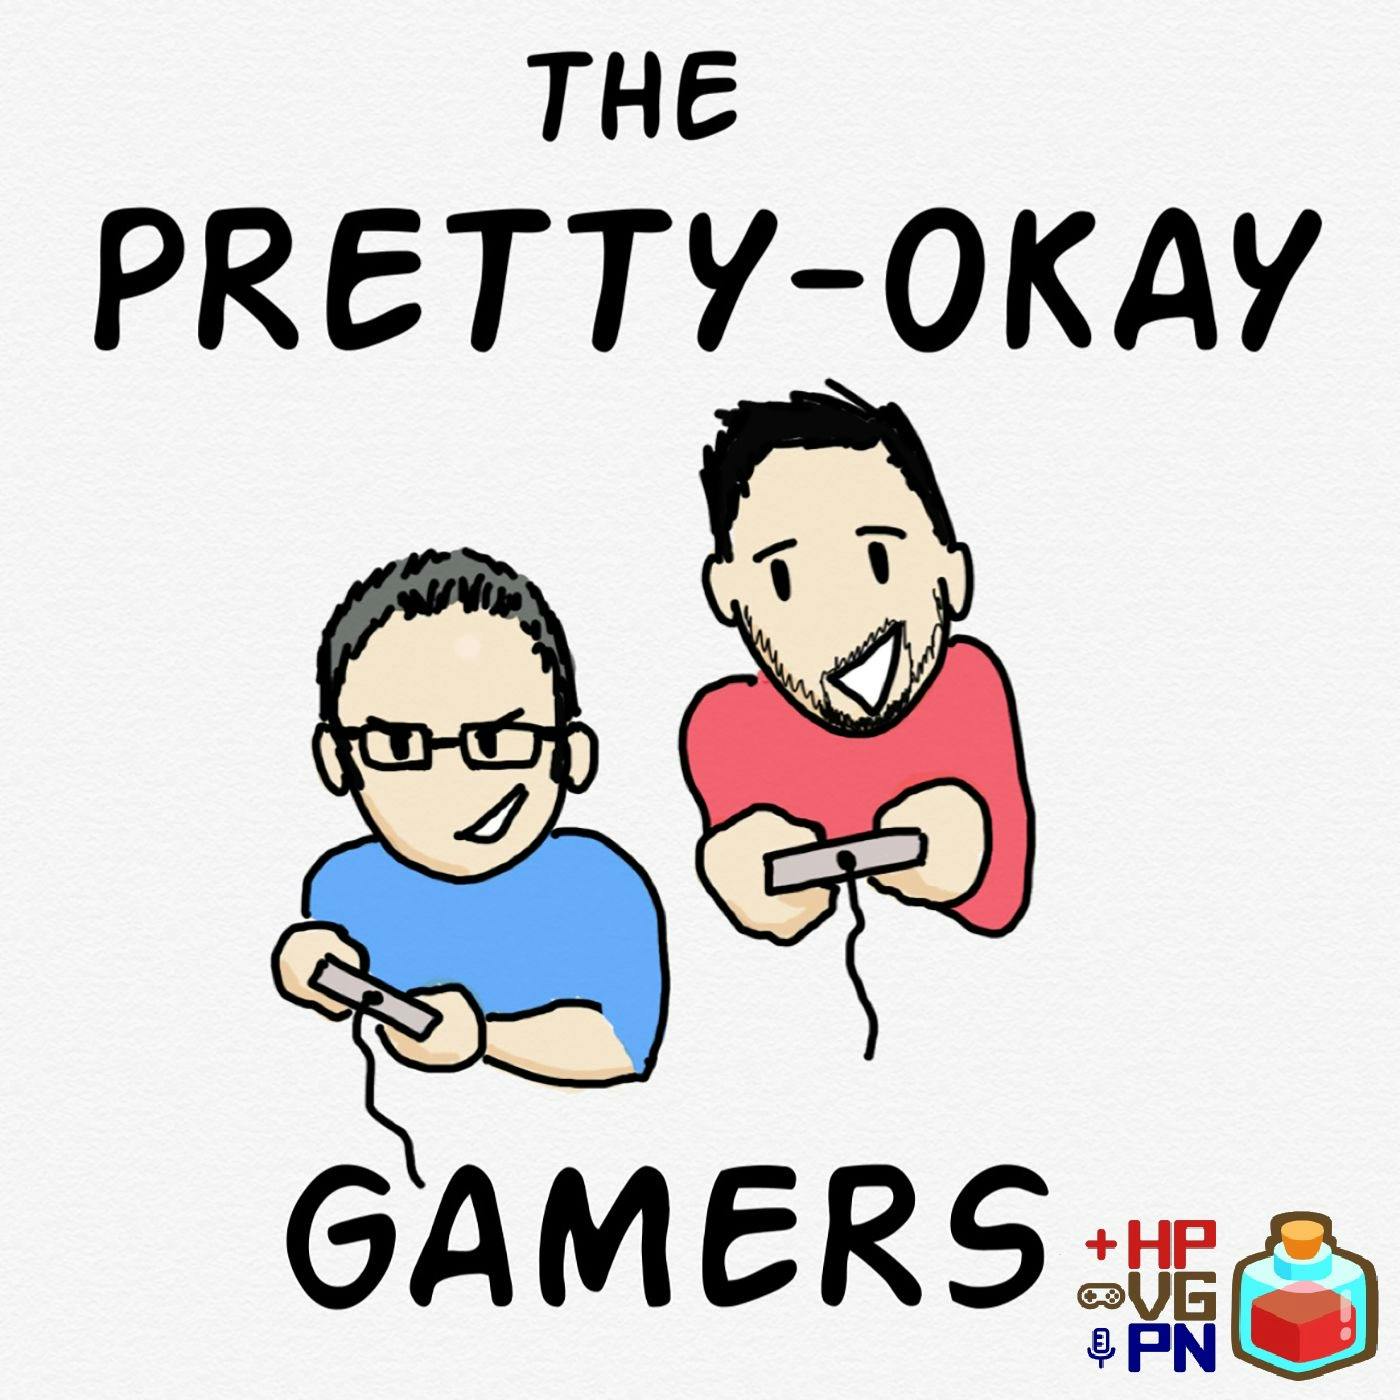 Episode 43: A Decade of Gaming